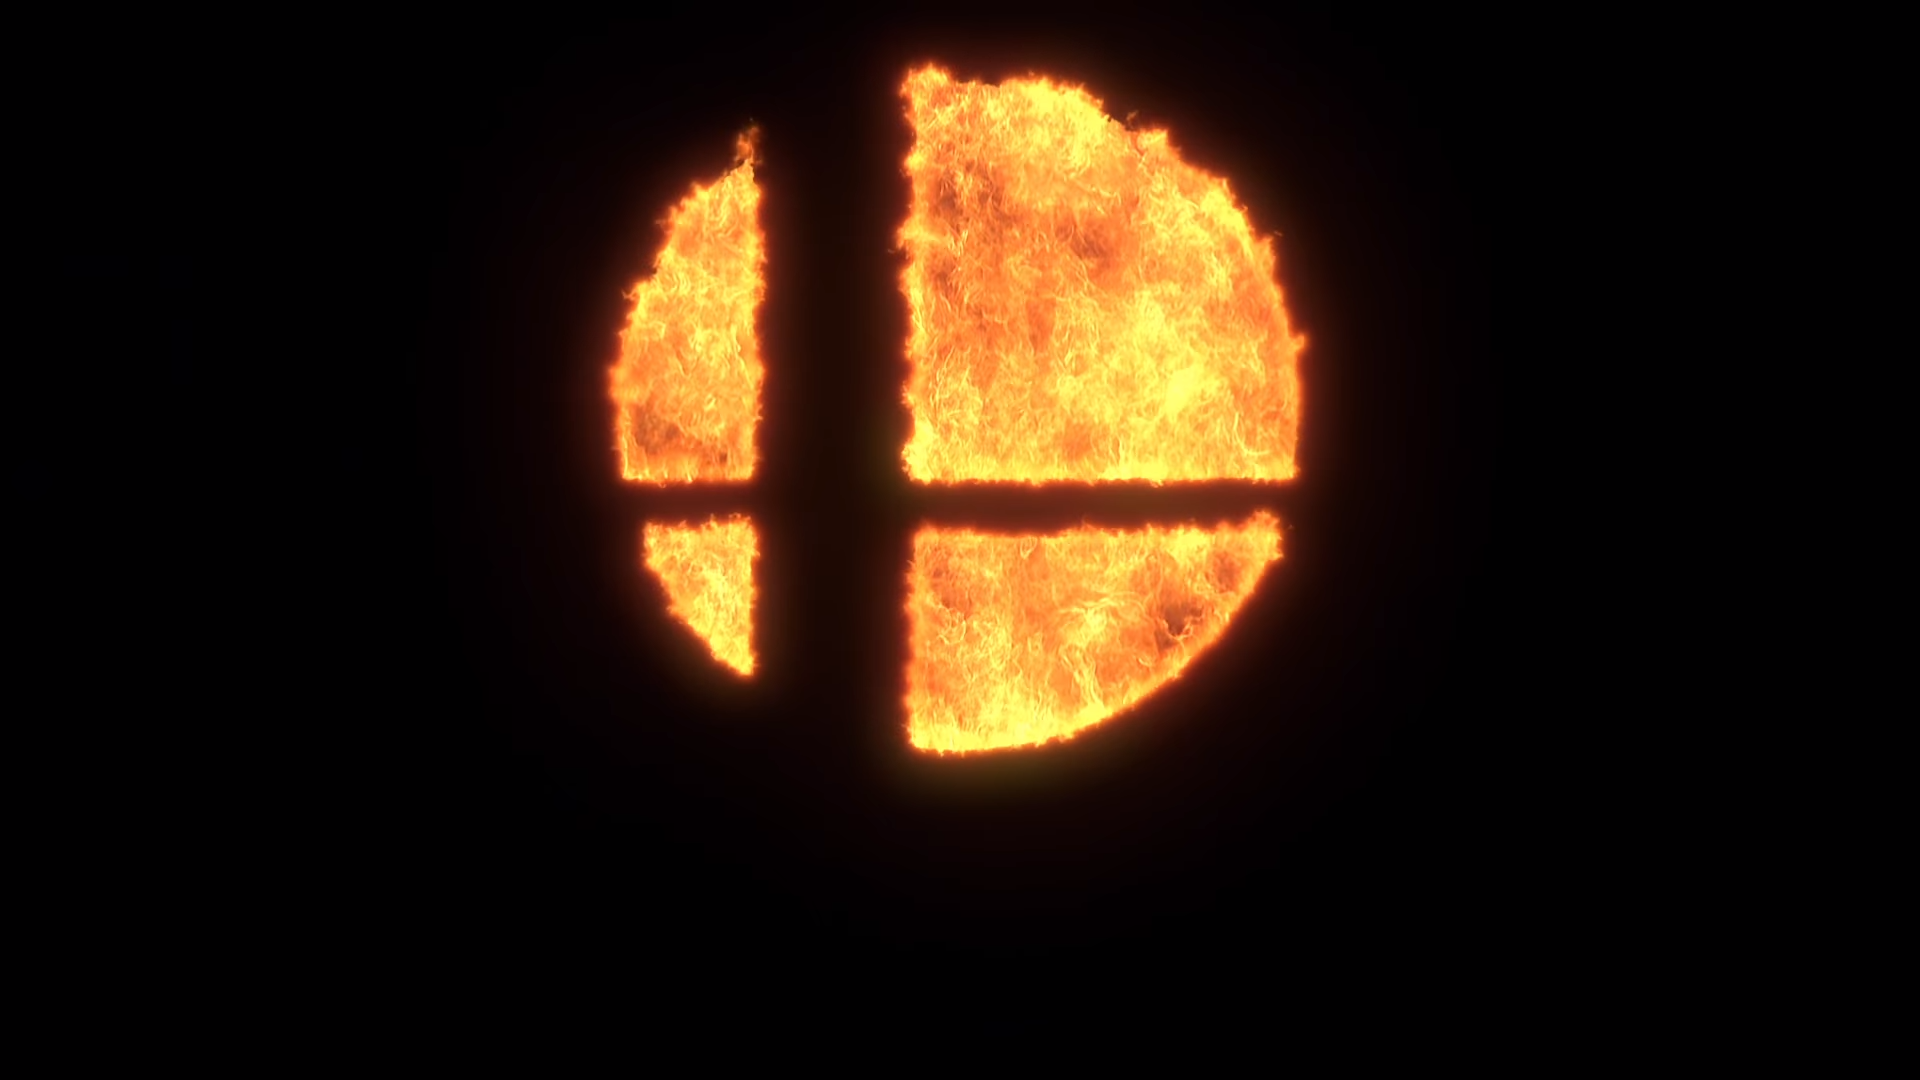 Smash Ball on Fire [1920×1080] grab from today's Direct